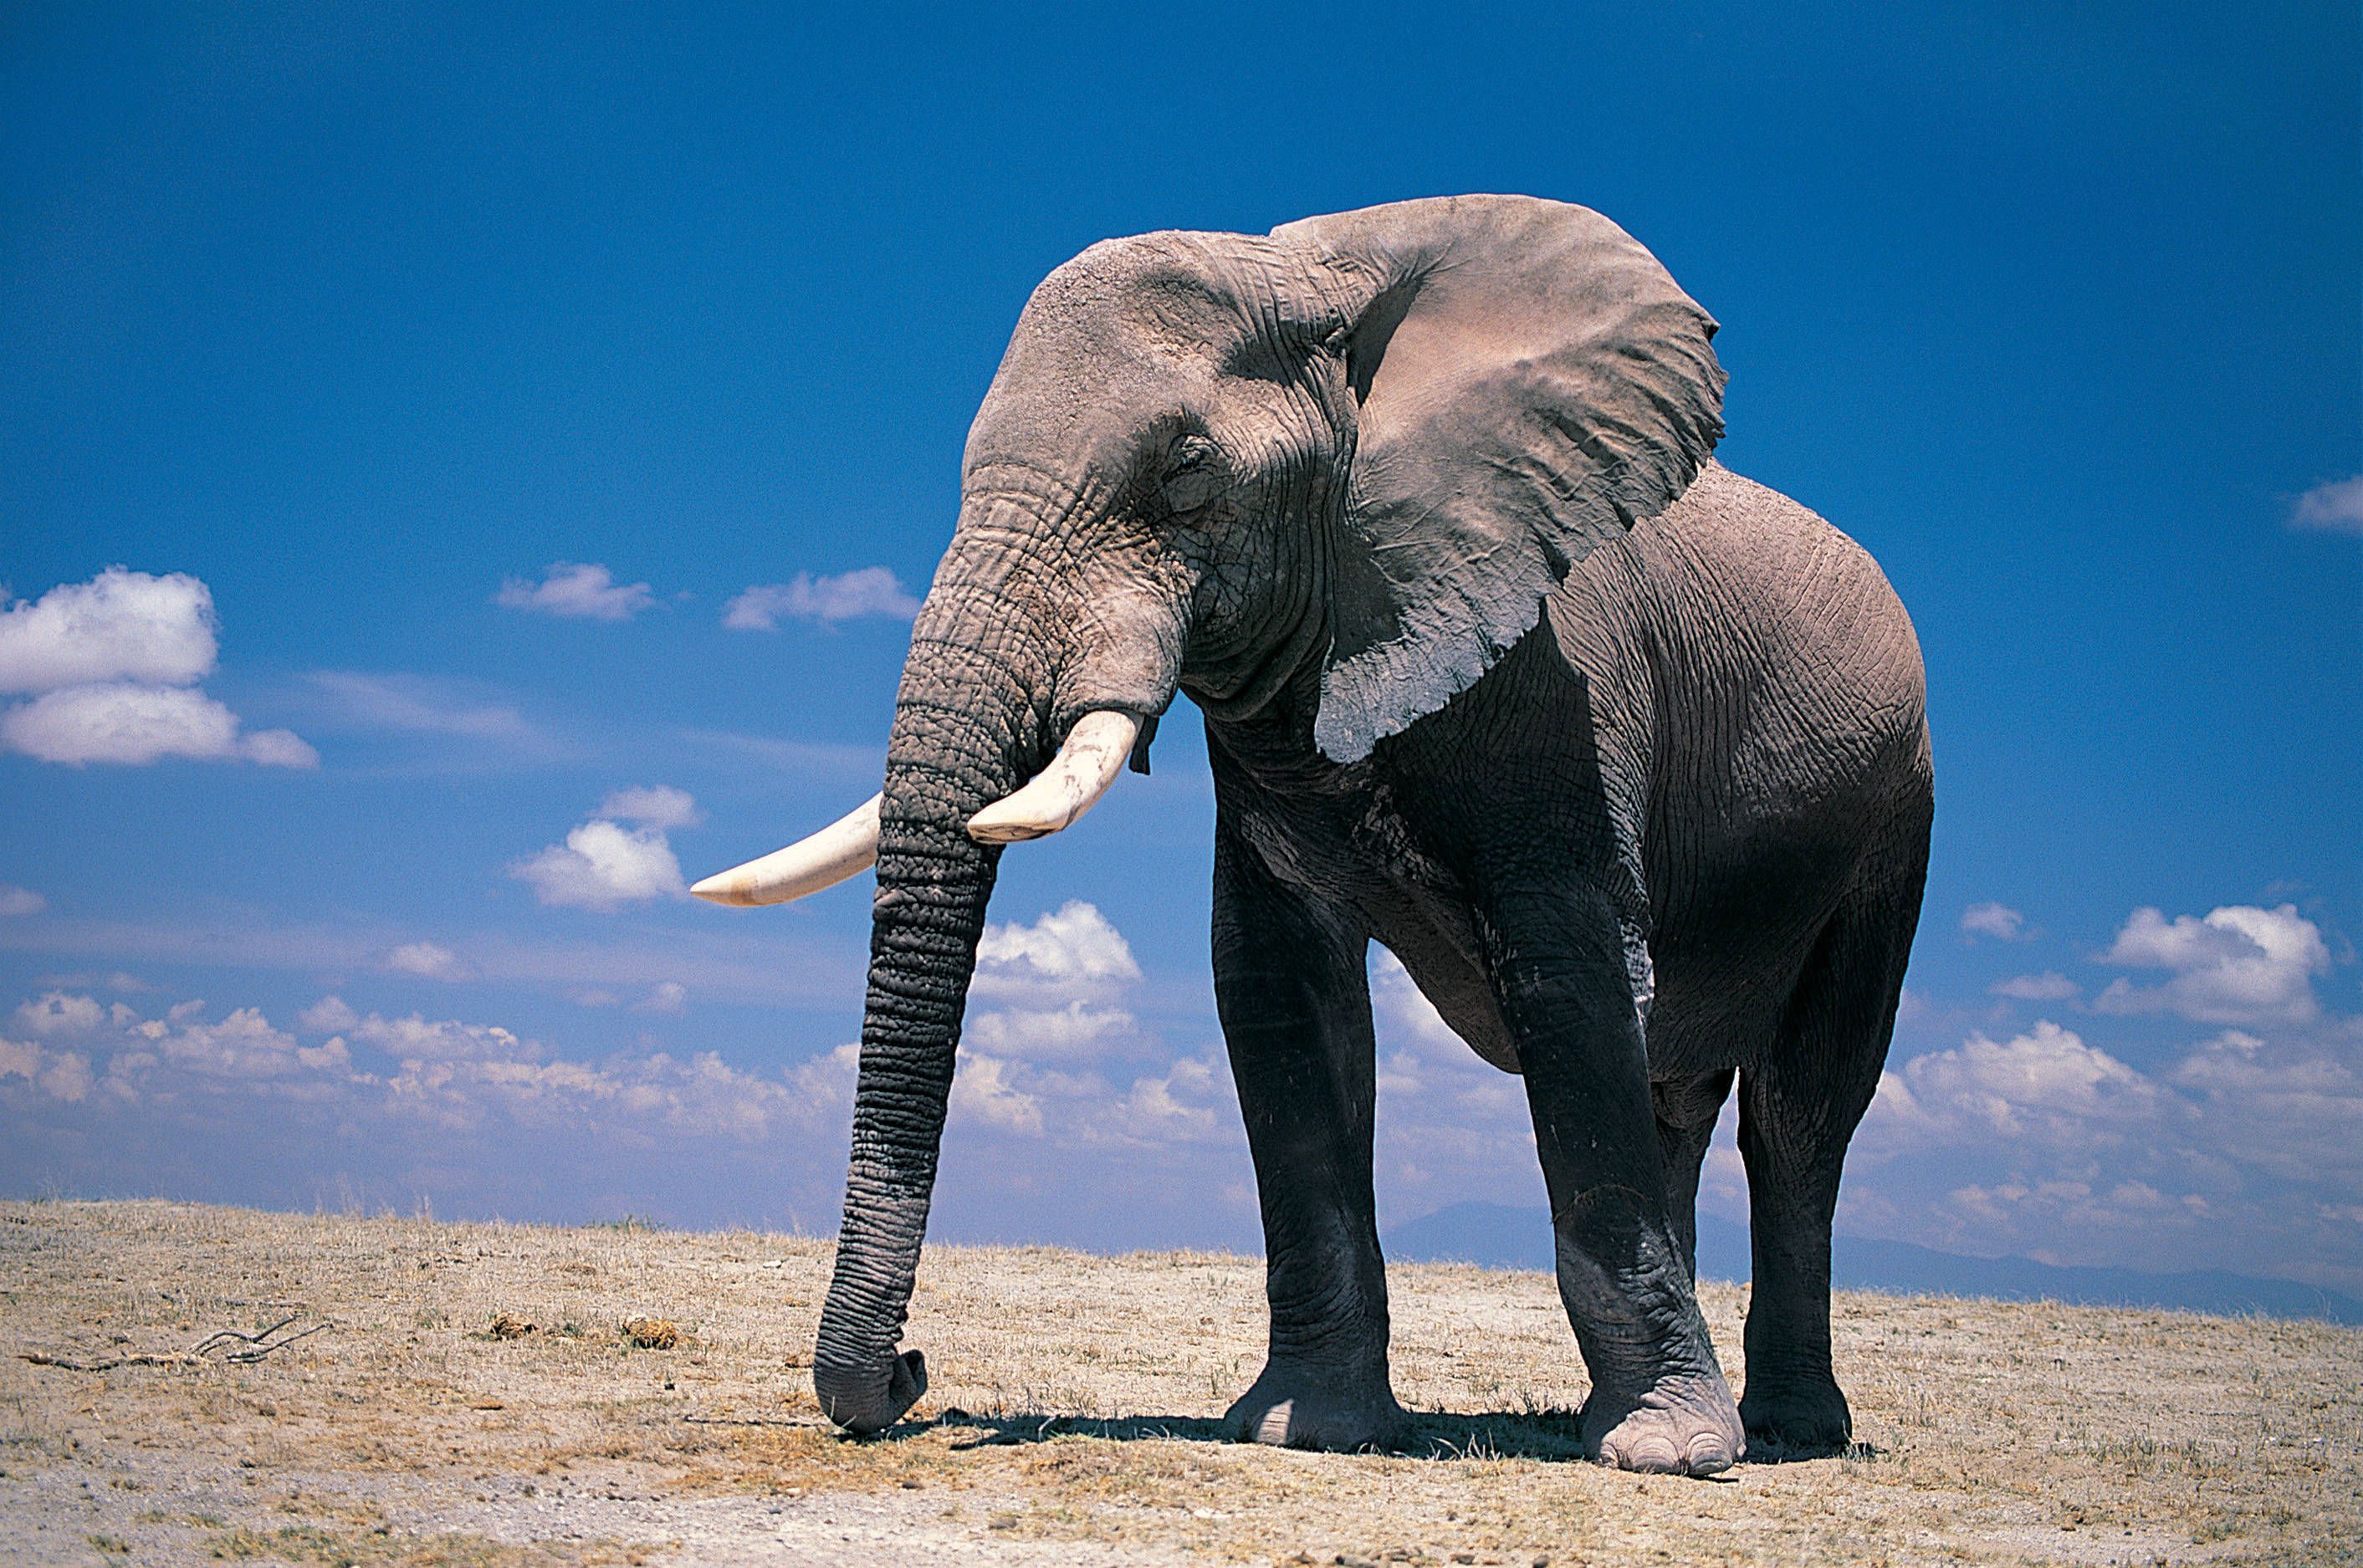 HD Elephants Wallpapers y Fotos HD Animals Wallpapers | Amable